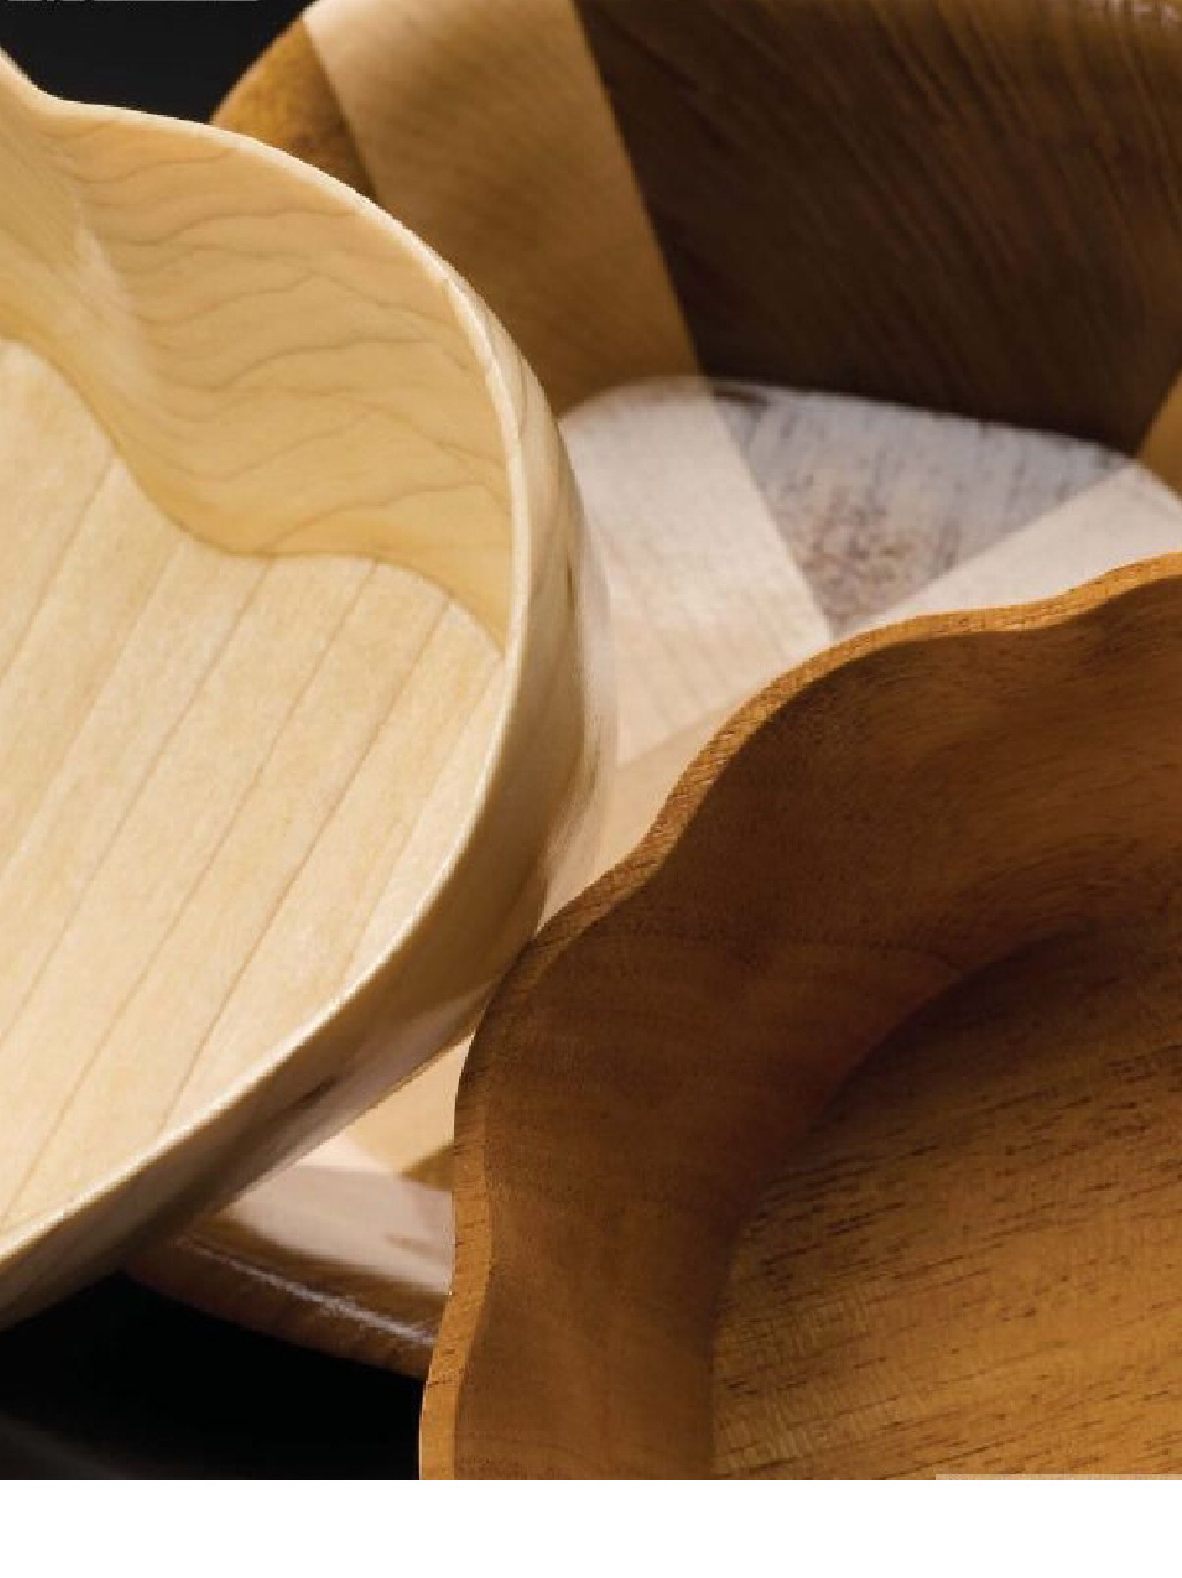 Wooden Bowls from the Scroll Saw-28 Useful & Surprisingly Easy-to-Make Projects